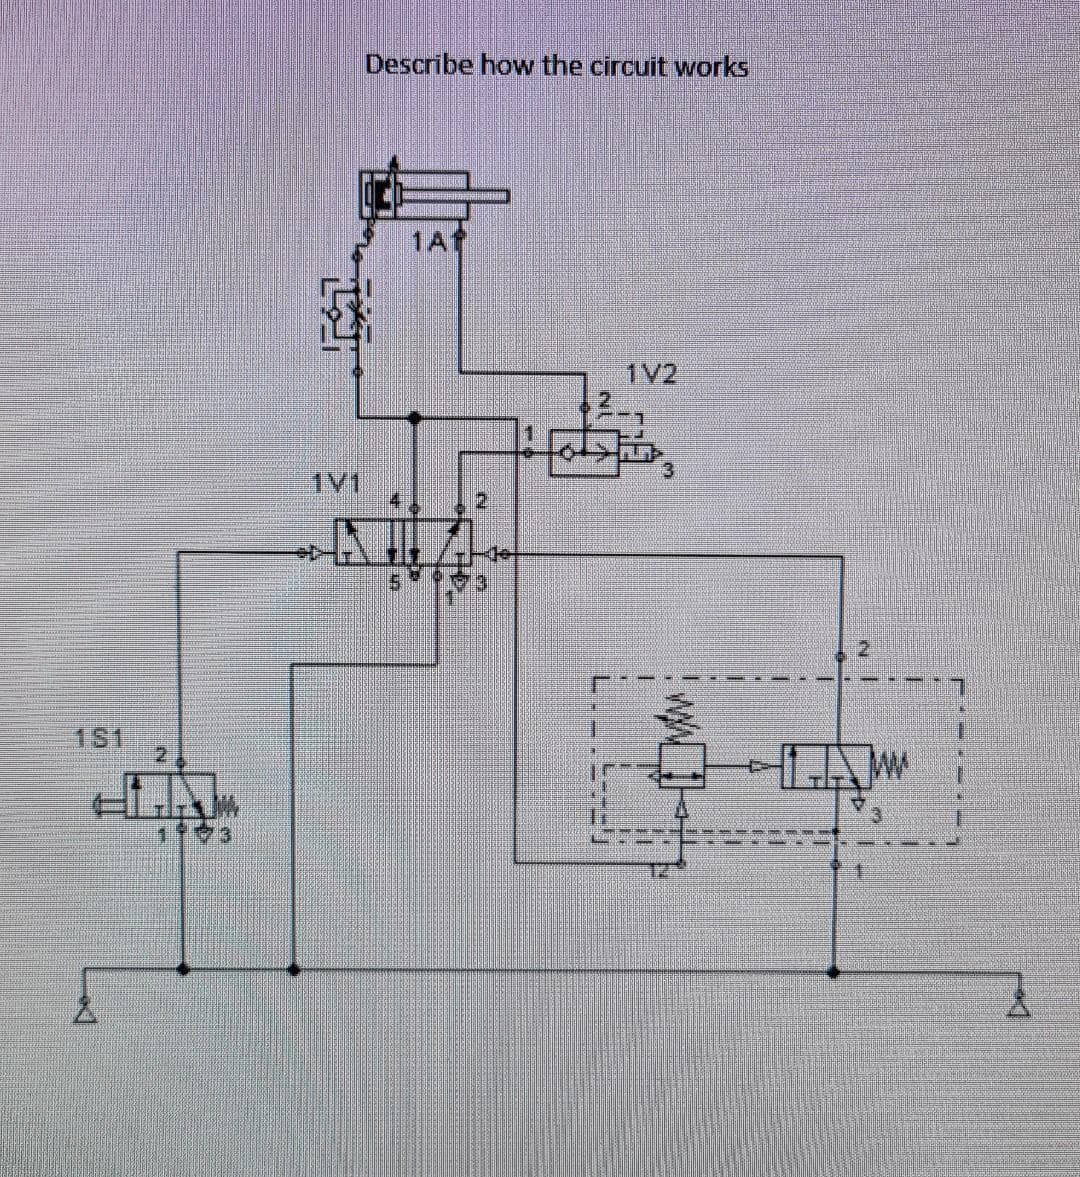 Describe how the circuit works
1At
1V2
3
1V1
3.
1S1
W TH
1.
